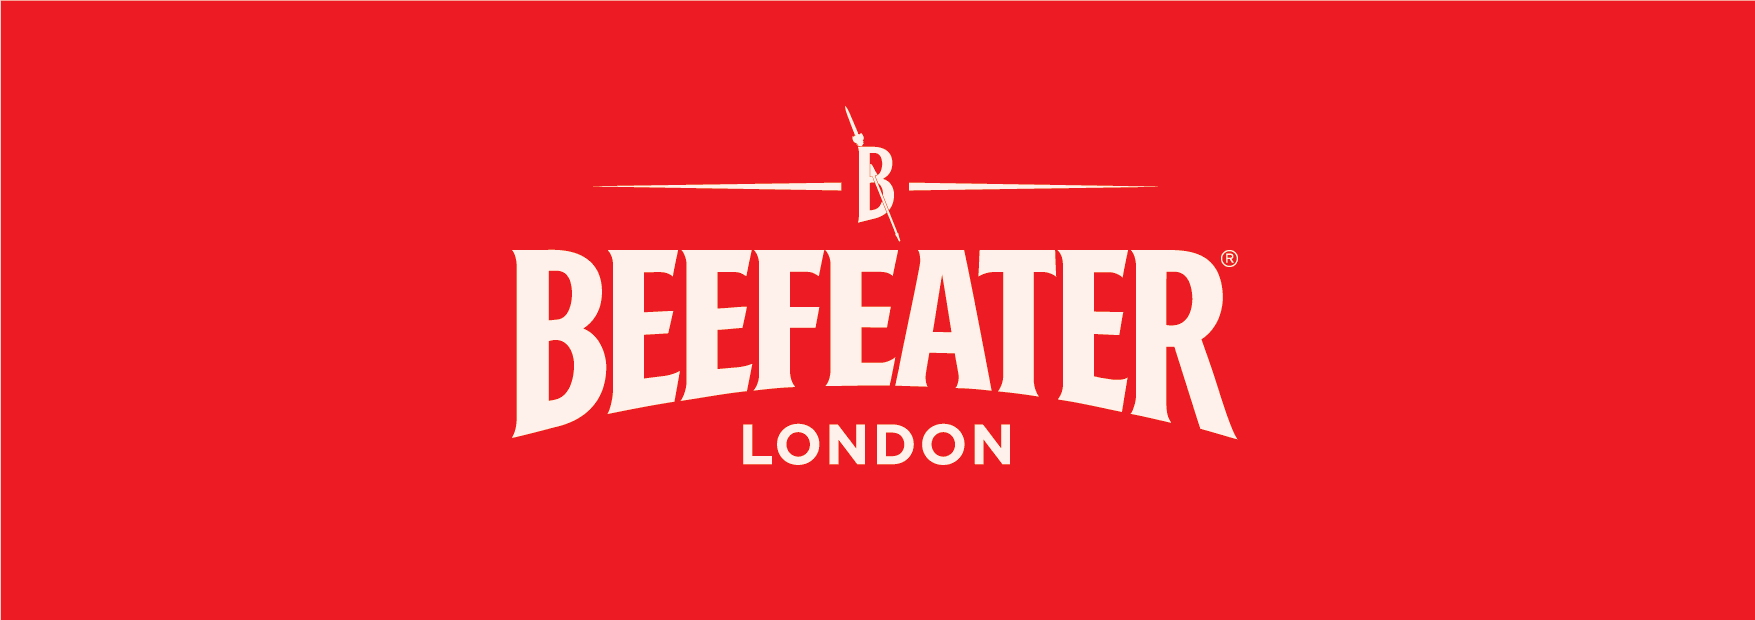 Beefeater Logo - Beefeater Gin Rebranding on Behance | 【 ＴＹＰＥＦＡＣＥ －字 ...